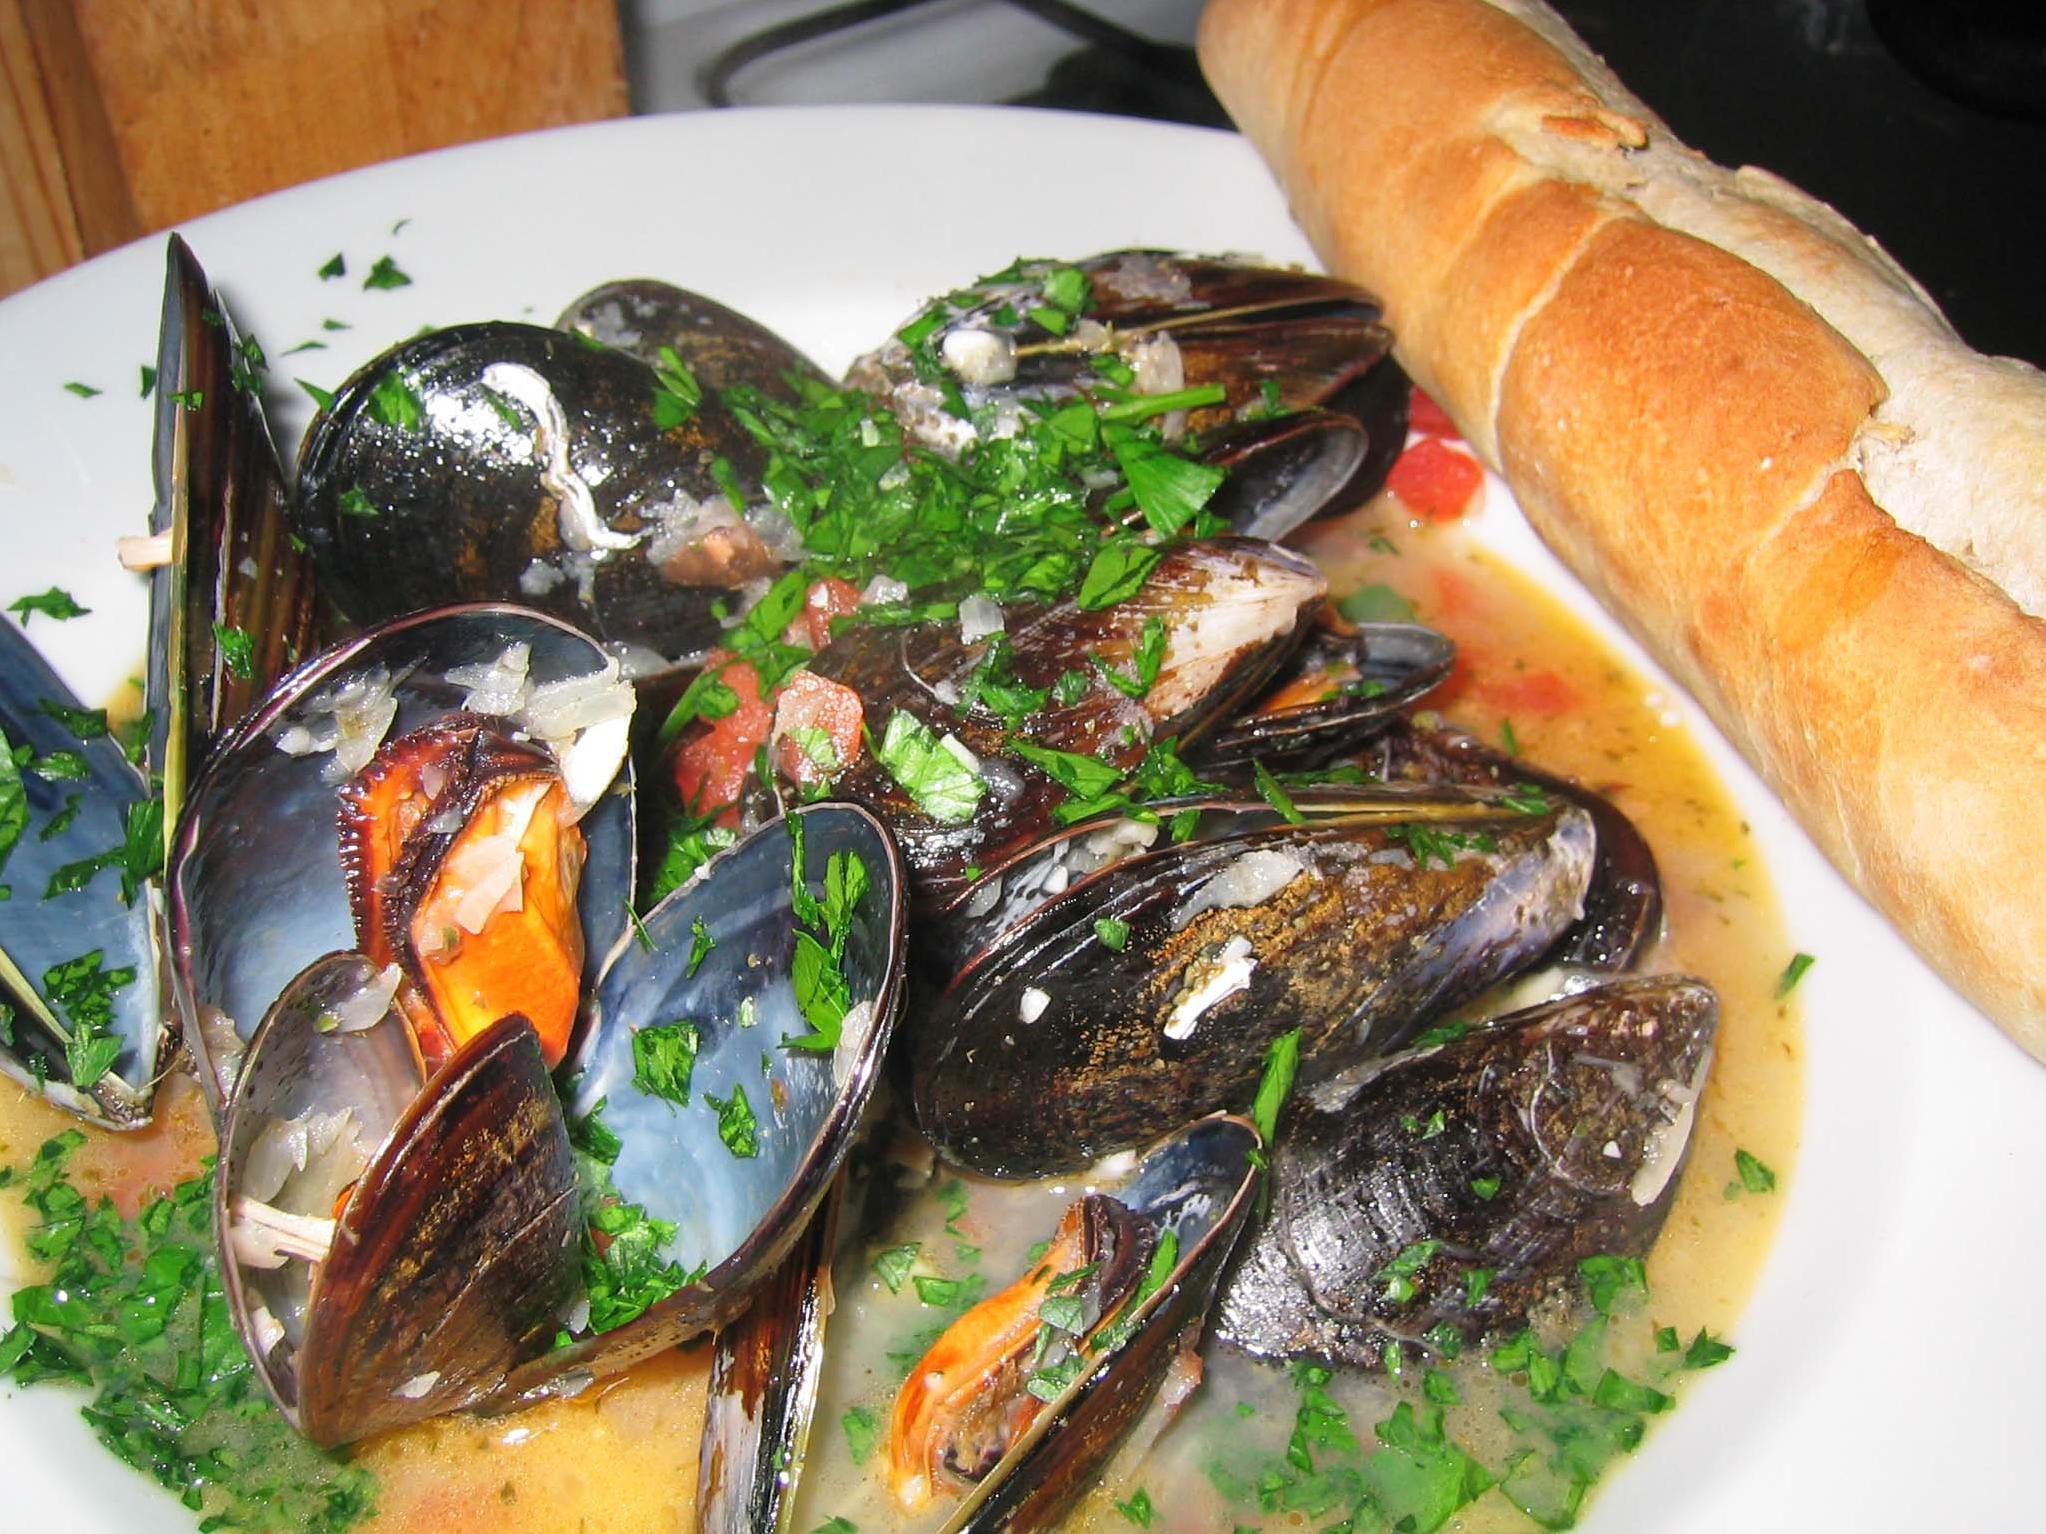  It's hard to resist these plump and juicy mussels, perfectly cooked and bathed in a deliciously fragrant sauce.